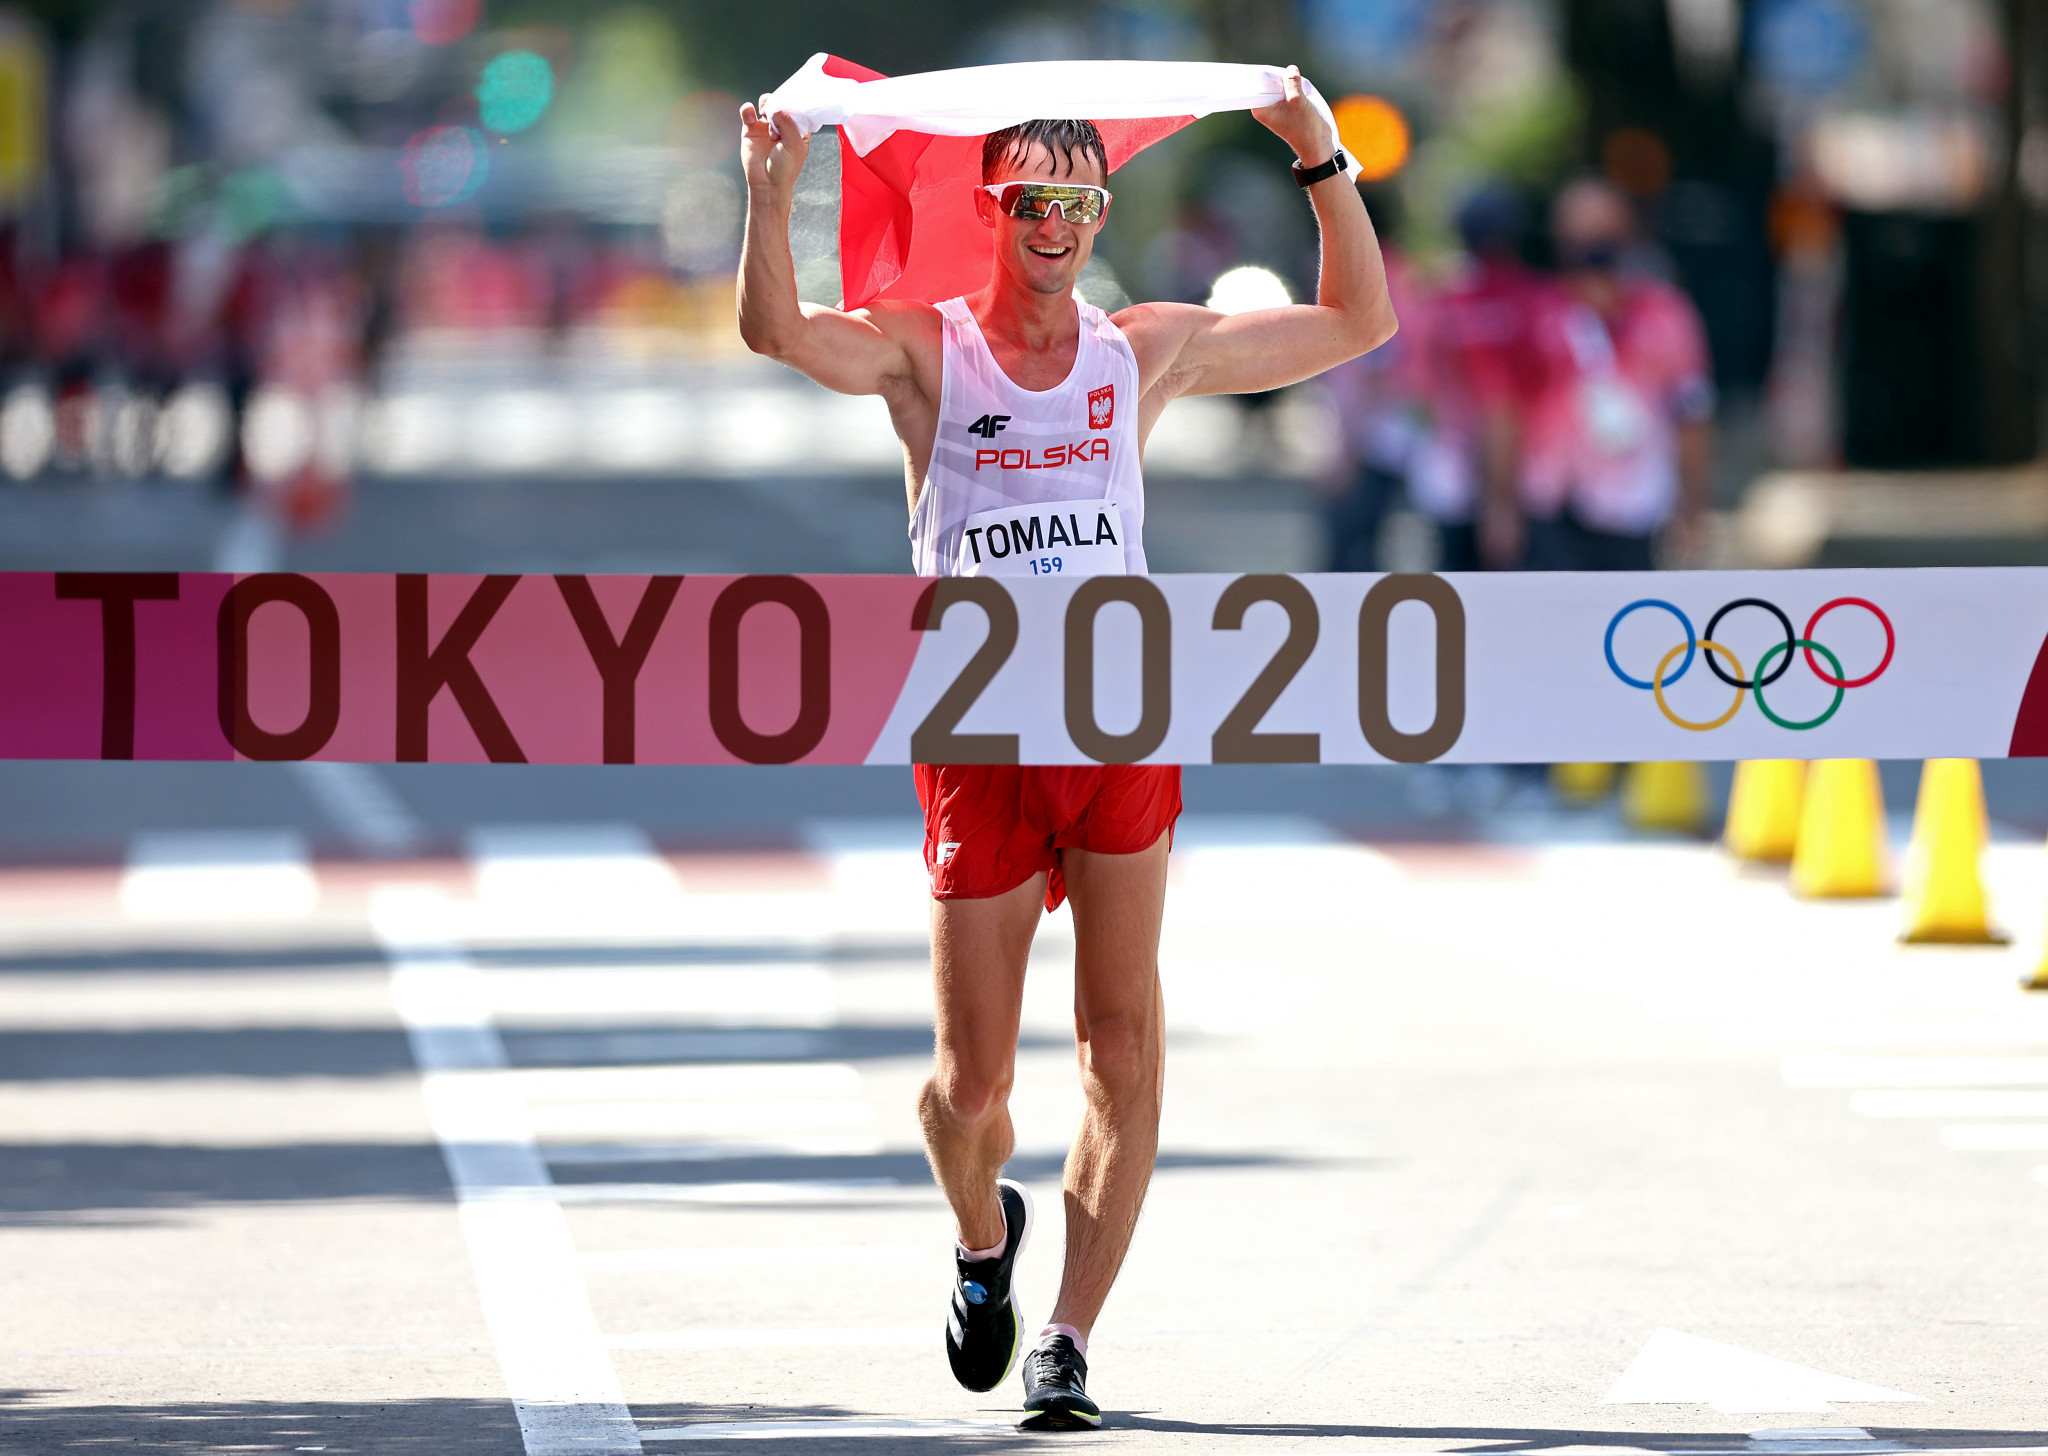 Poland's Dawid Tomala won the men's 50km race walk at Tokyo 2020, the event's last appearance on the Olympic programme after being dropped to help achieve gender equality ©Getty Images